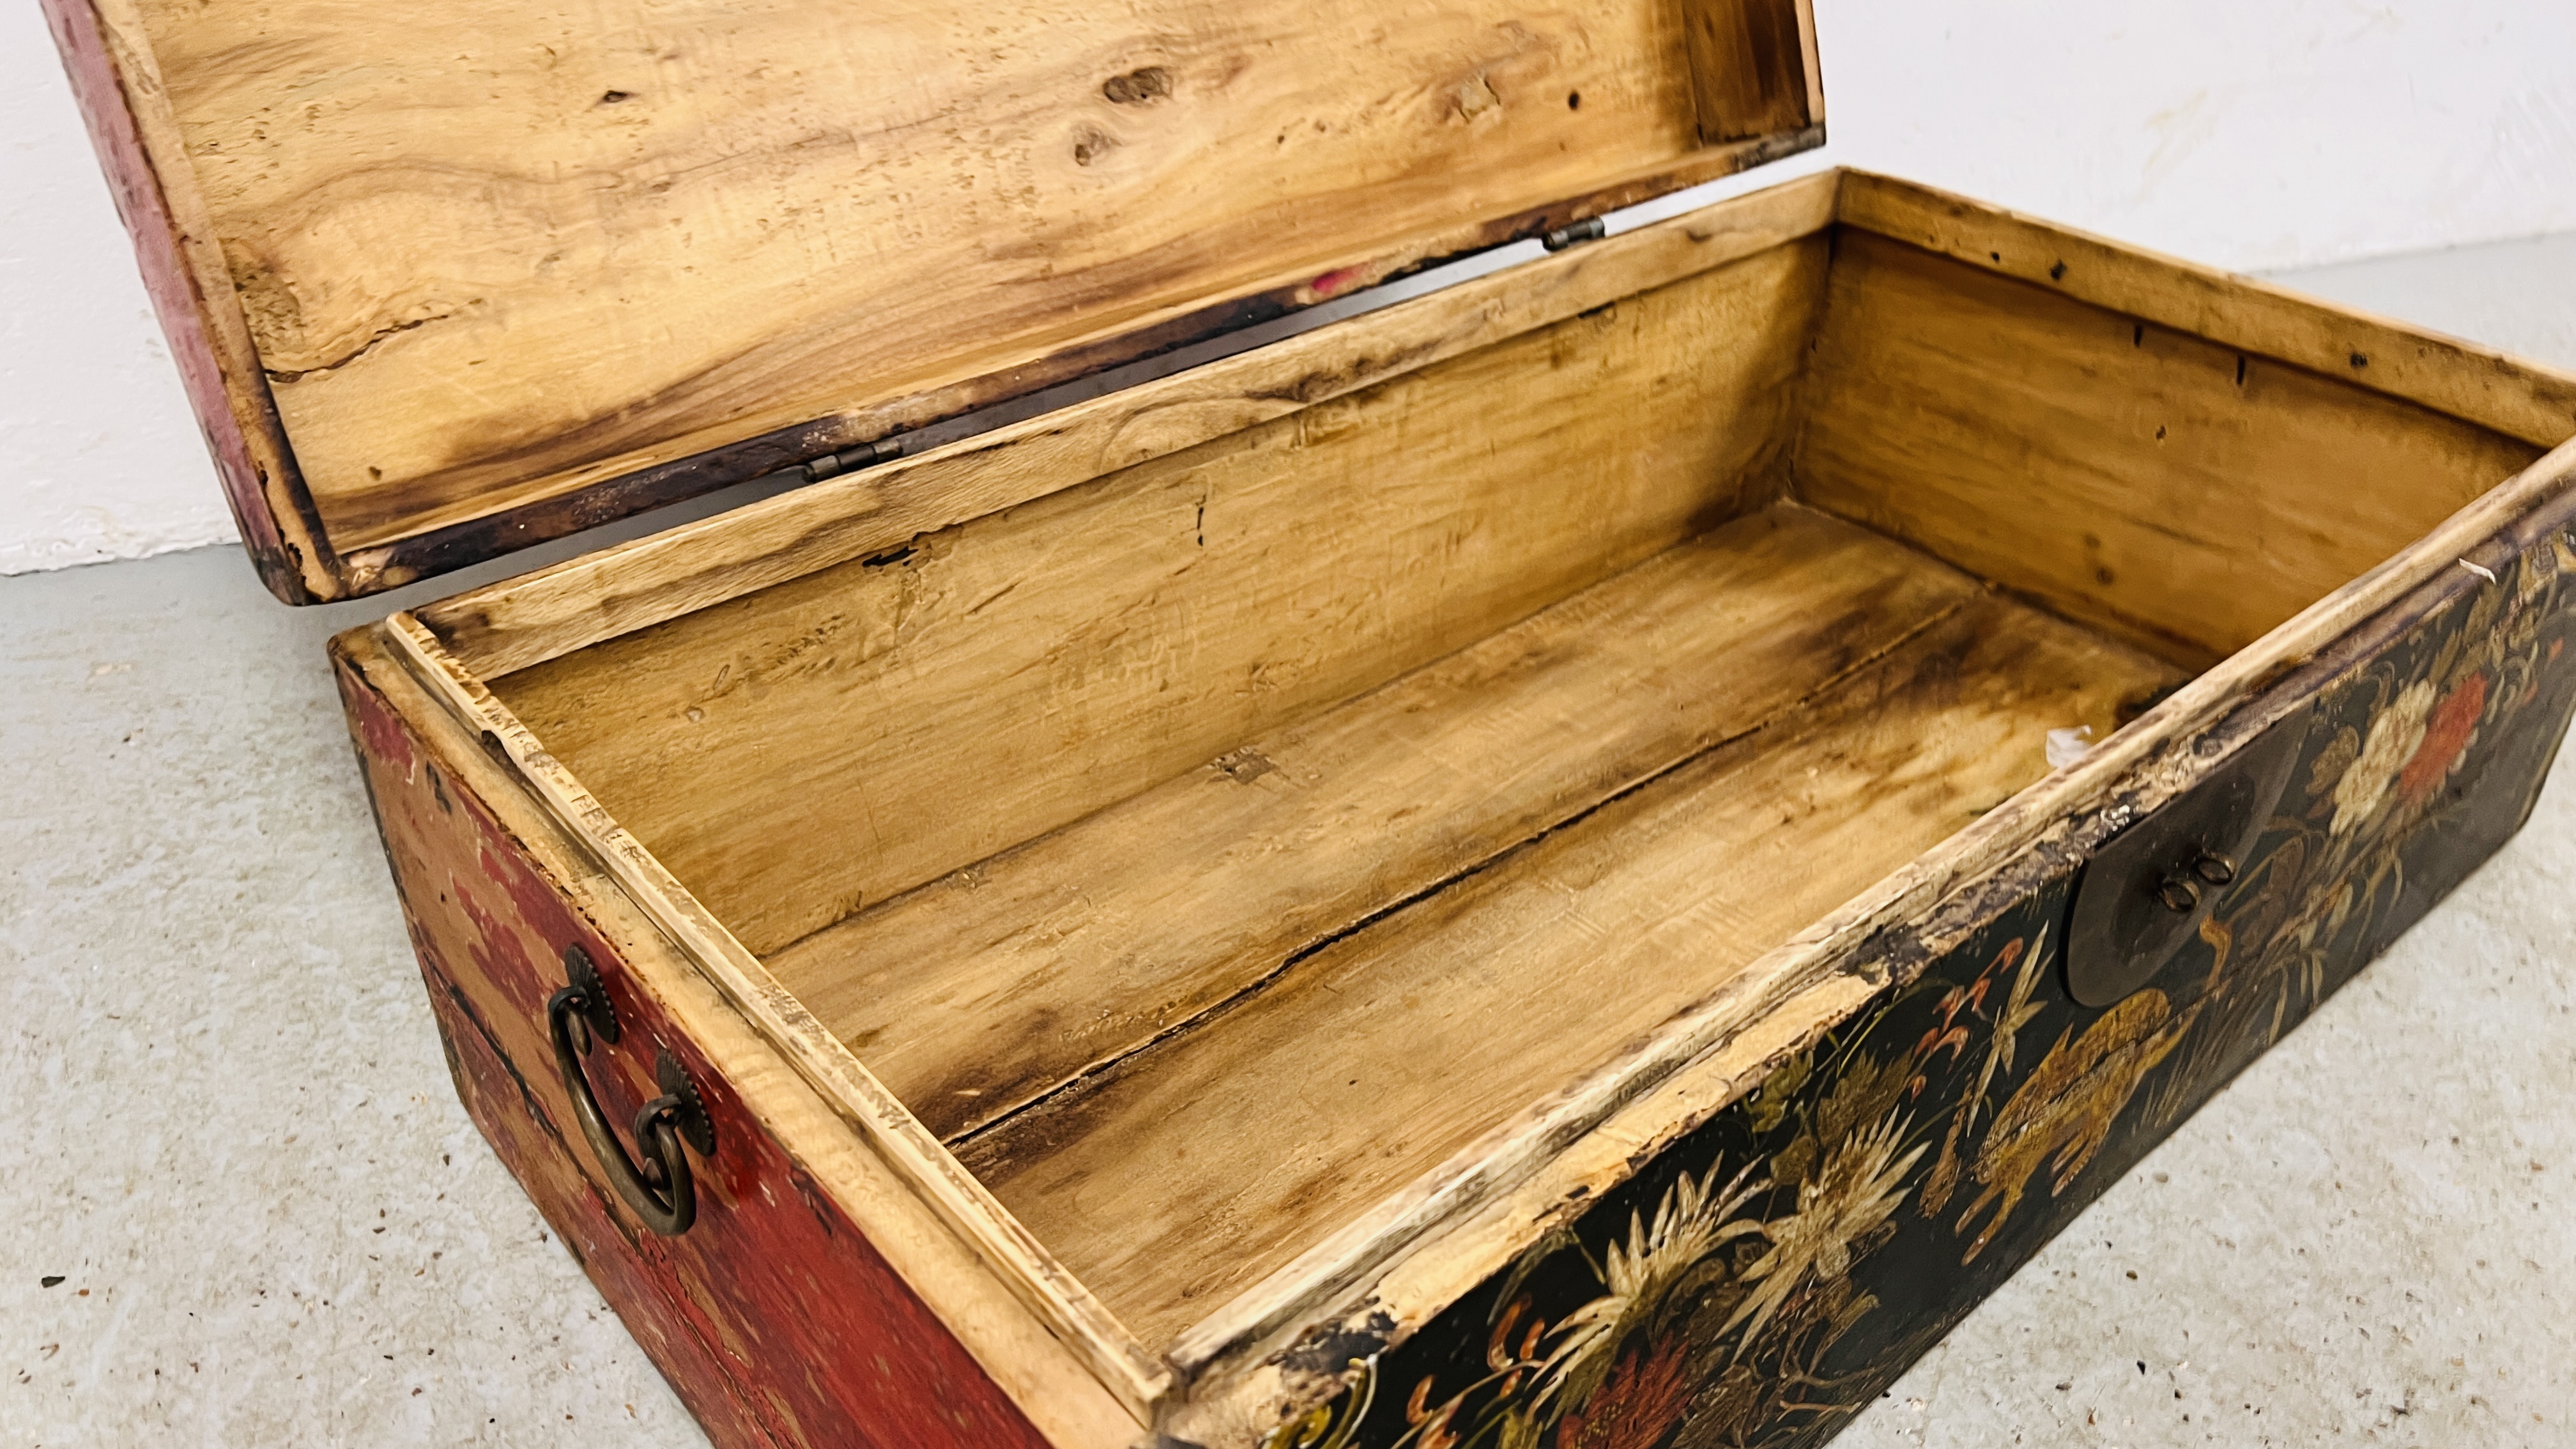 AN ANTIQUE CHINESE CAMPHOR WOOD THEATRICAL COSTUME TRUNK THE FRONT HAND PAINTED PANEL DEPICTING - Image 9 of 11